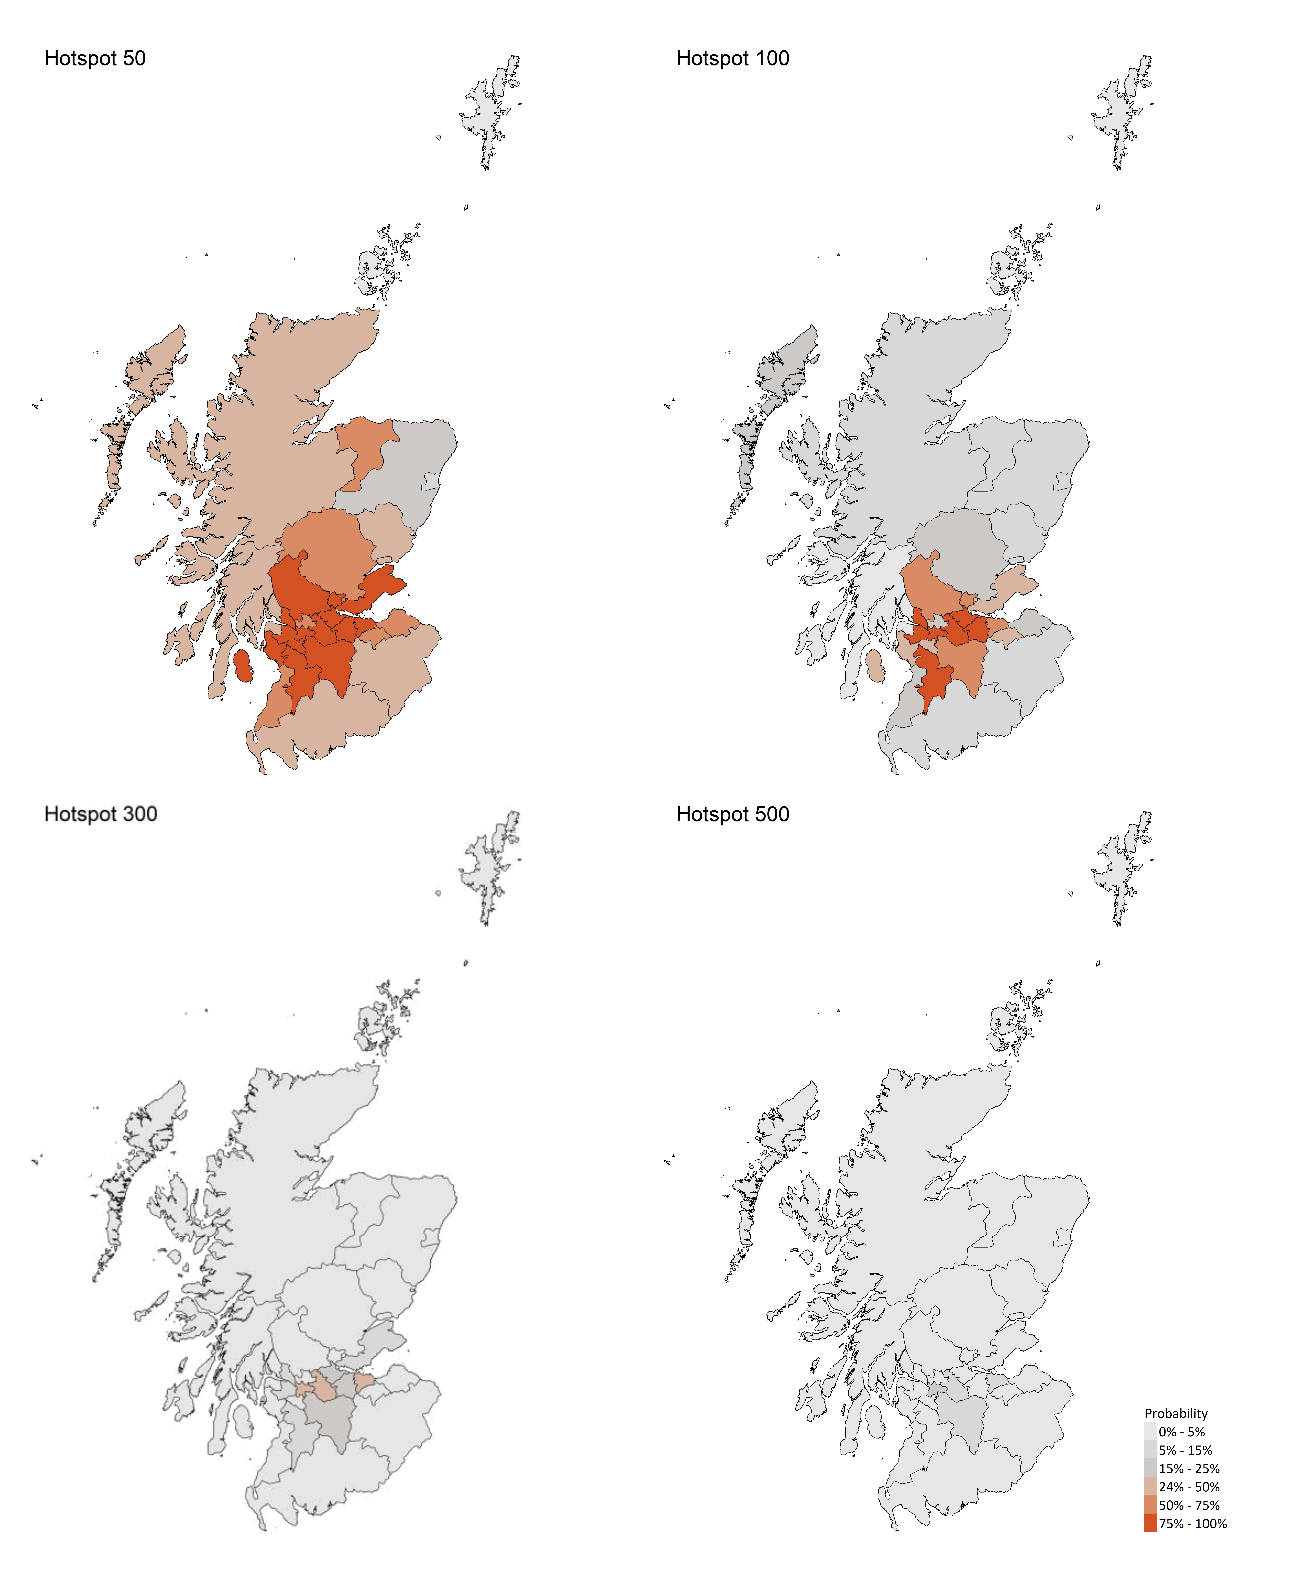 A series of maps showing the probability of local authority areas having more than 50, 100, 300 or 500 cases per 100K (7 - 13 March 21)